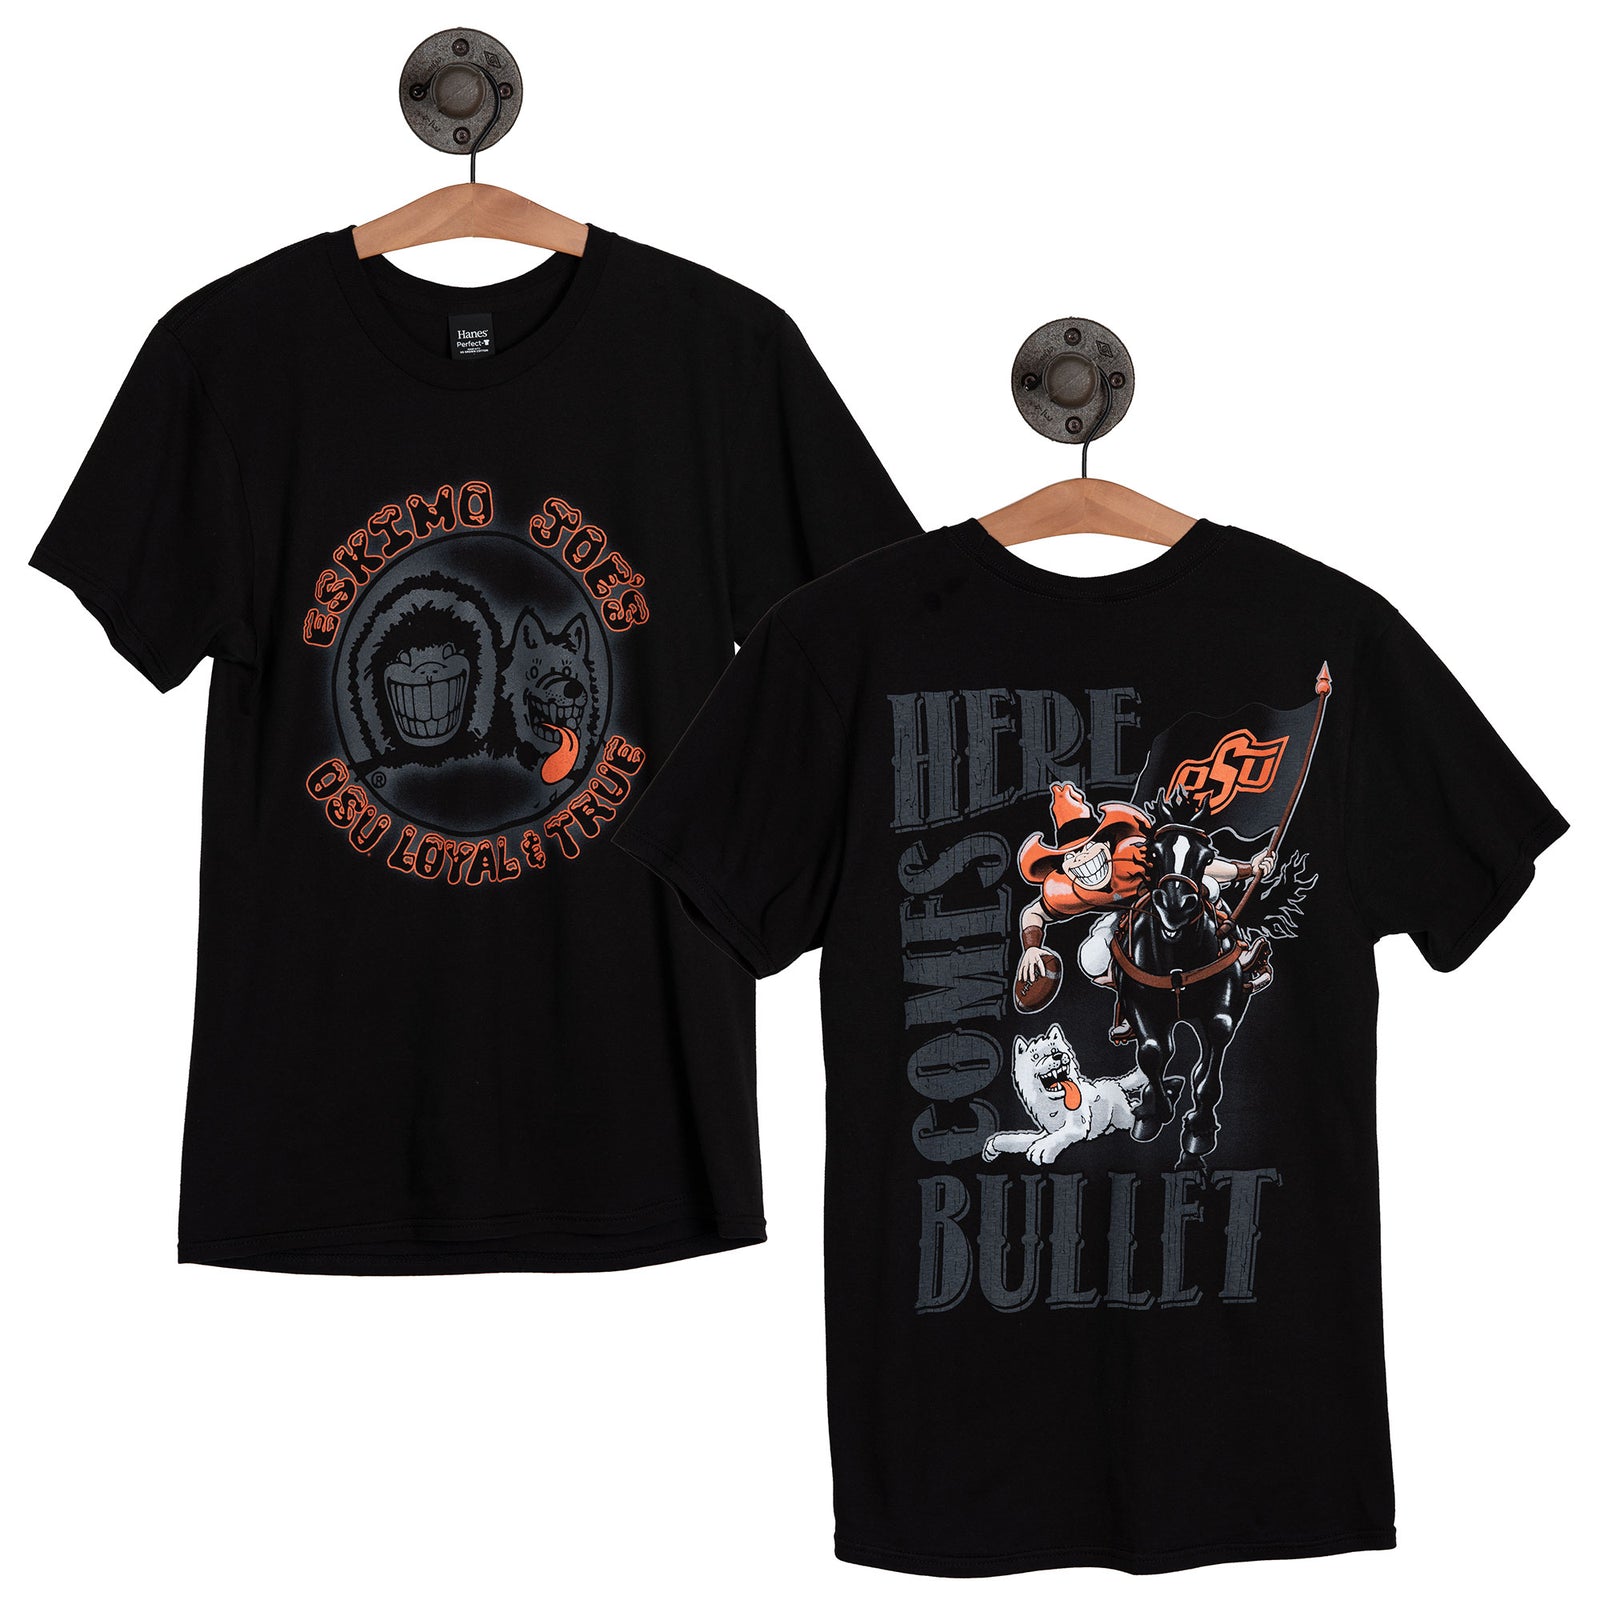 HERE COMES BULLET TEE - HCBT